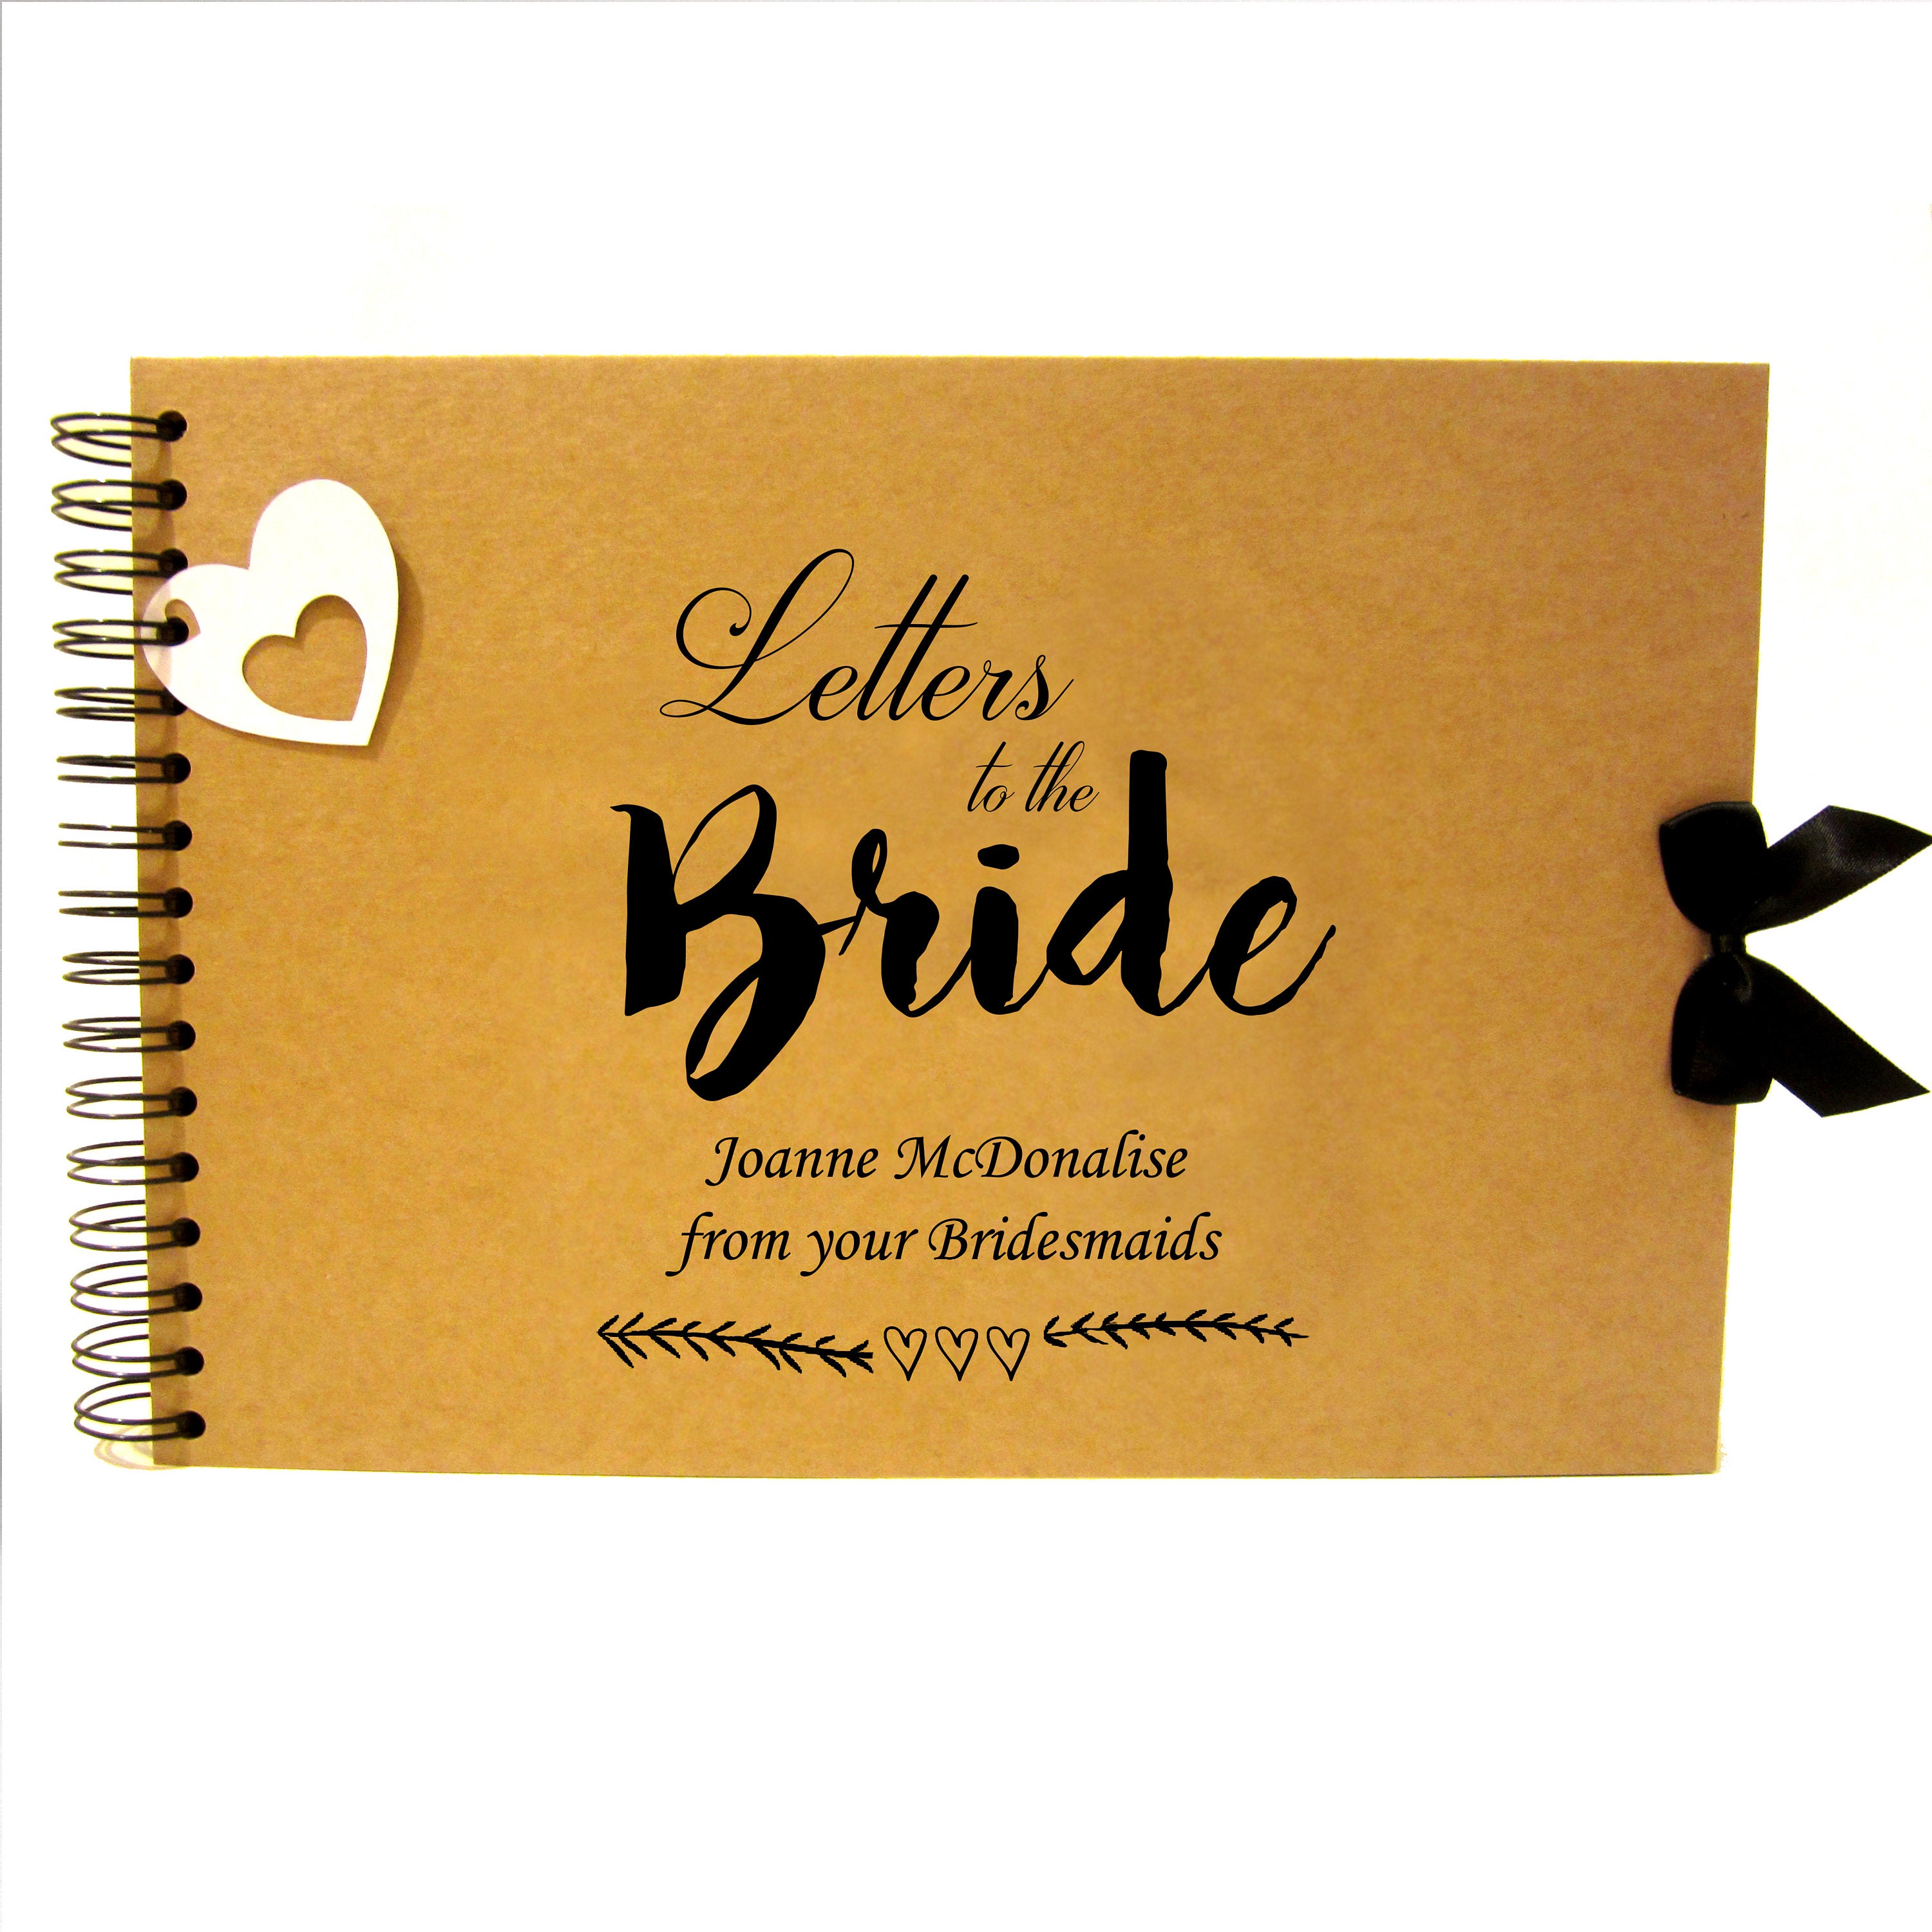 PERSONALISED. LETTERS TO THE BRIDE A5 SIZE PHOTO ALBUM/SCRAPBOOK/MEMORY  BOOK.